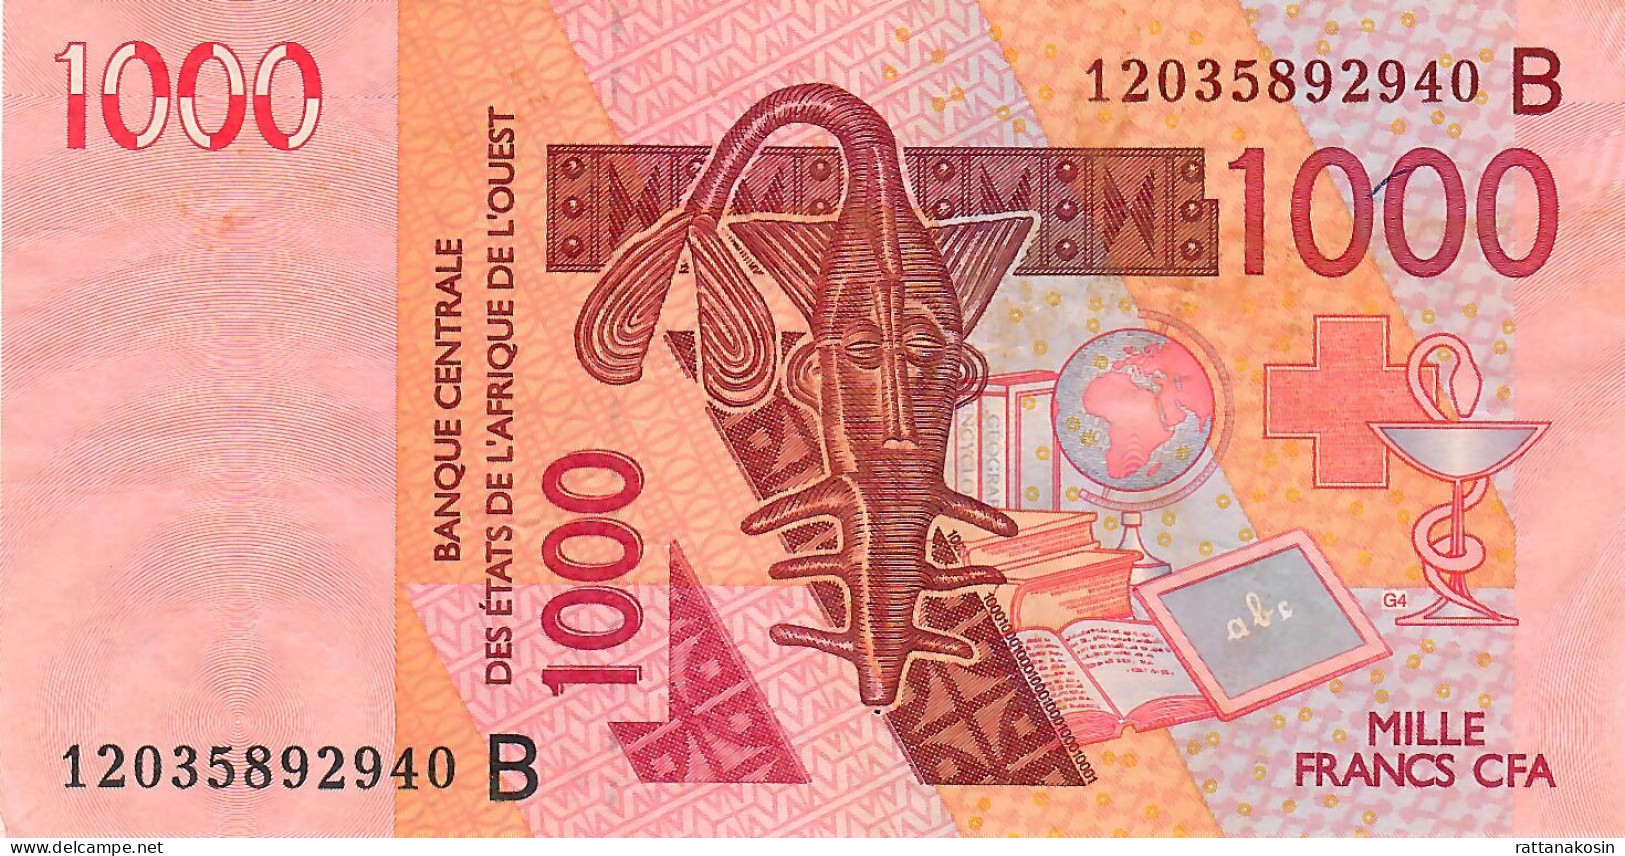 W.A.S. BENIN P215Bl 1000 FRANCS (20)12  2012 Signature 39  XF NO P.h. - West African States